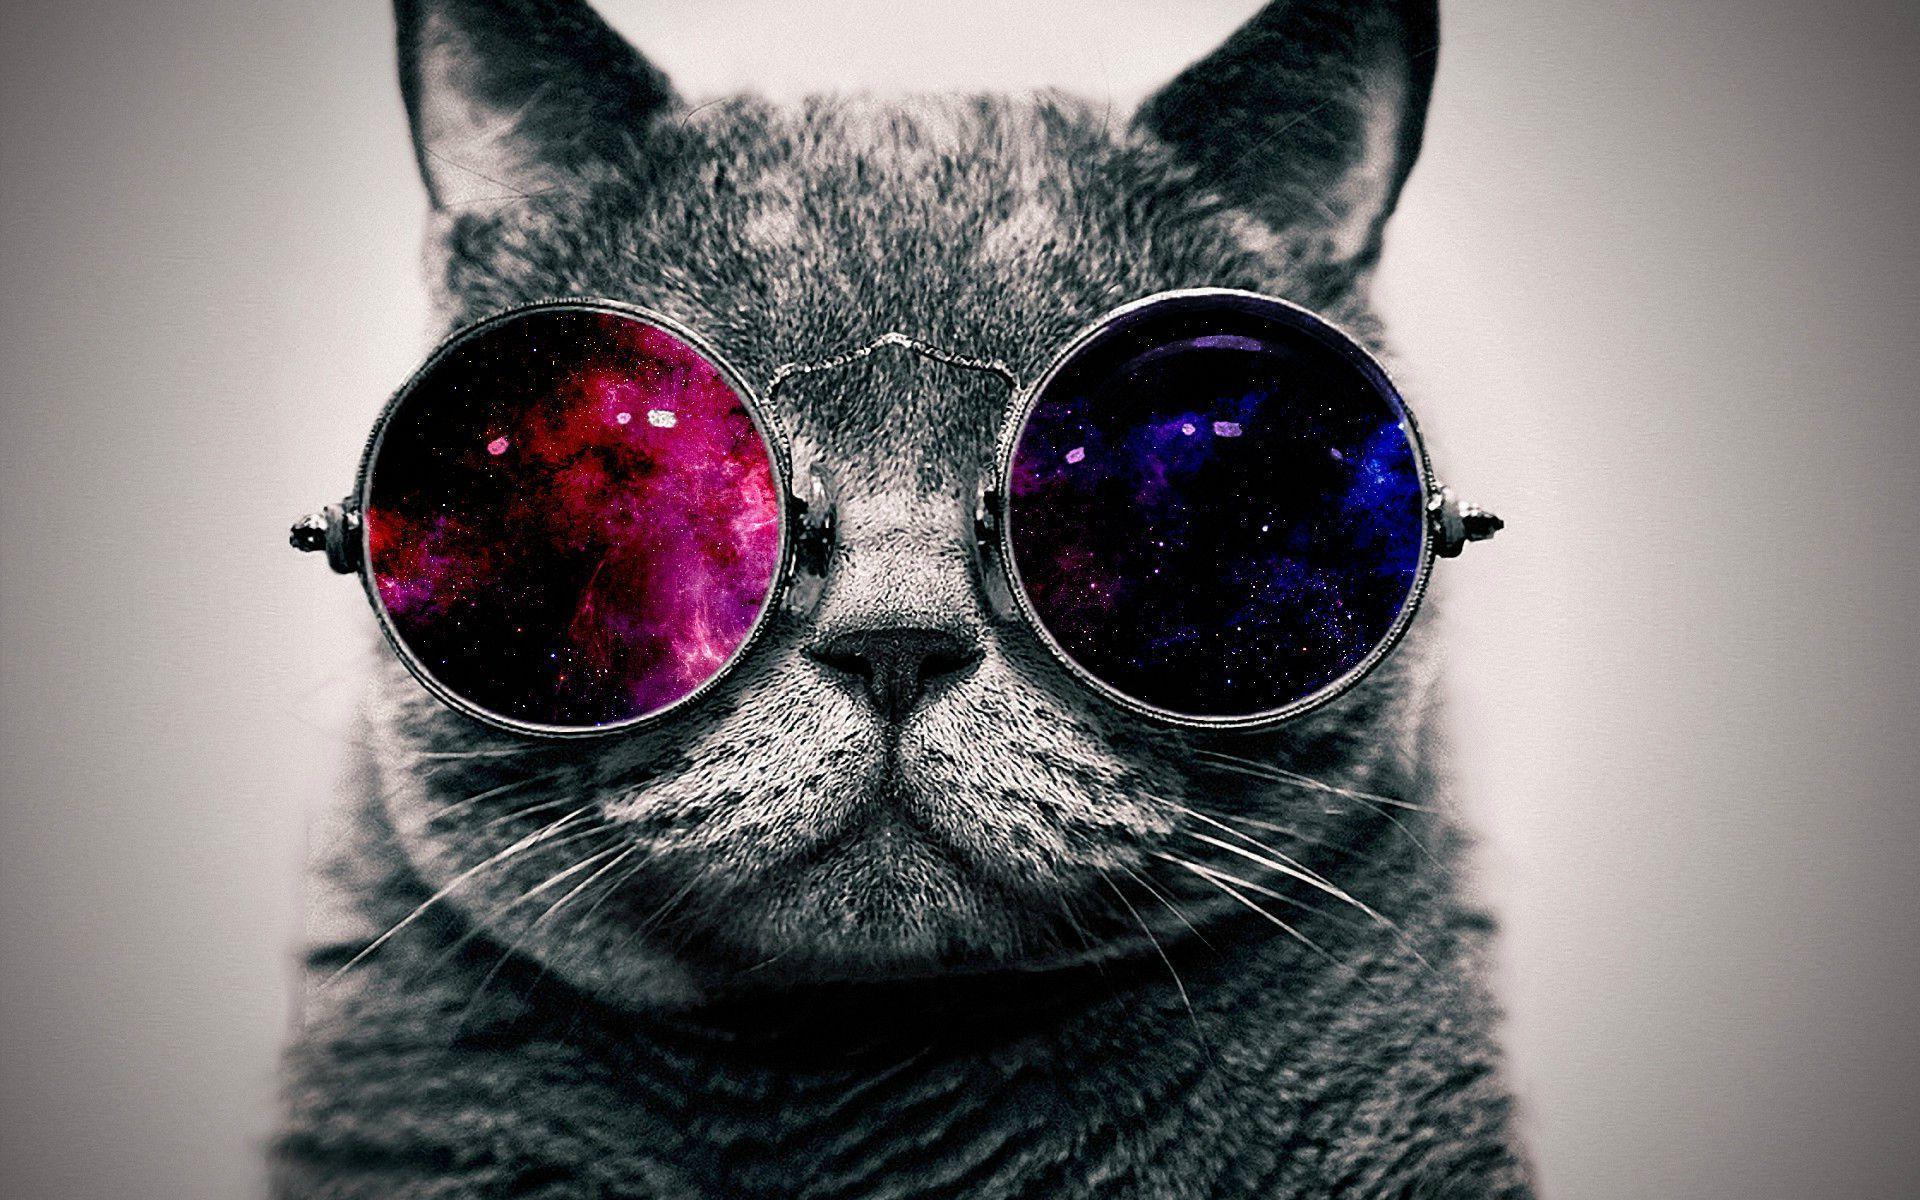 Cool Cat Backgrounds